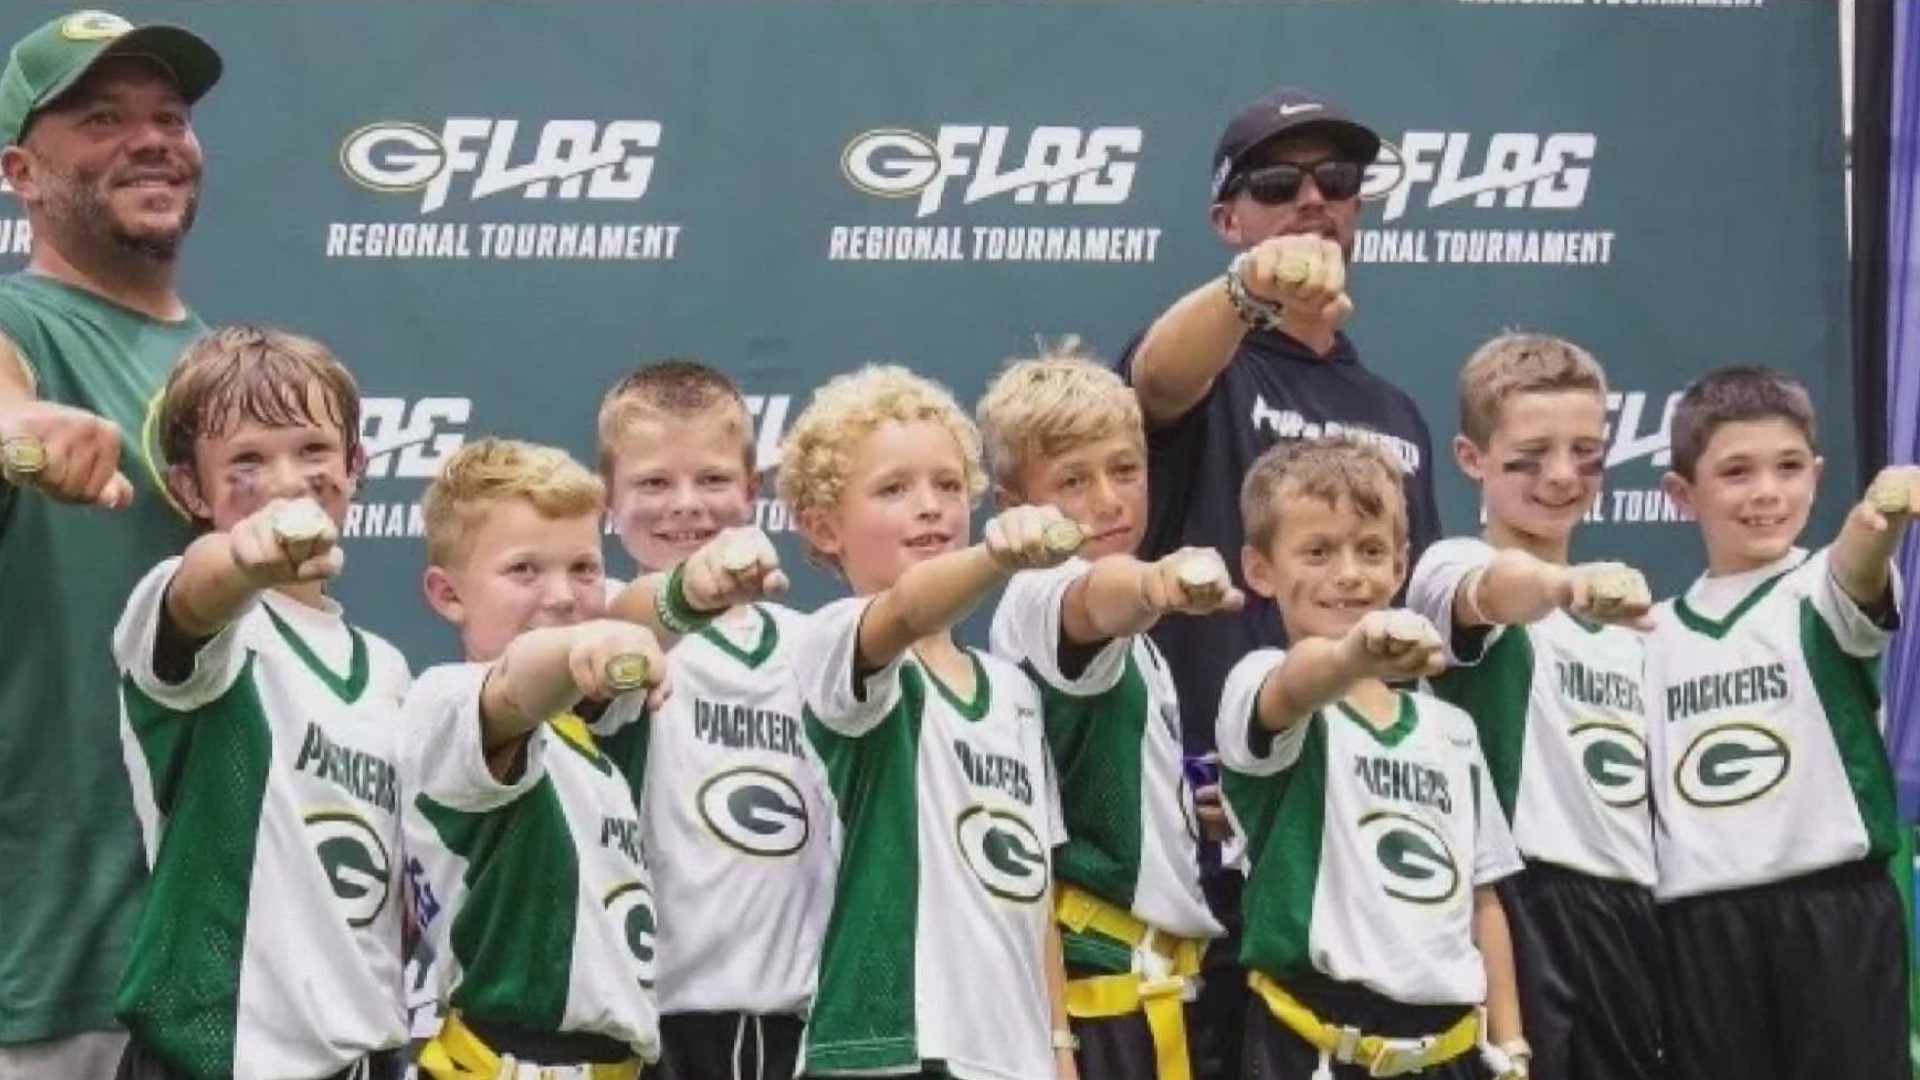 The NWO Rockets from the 8U League earned a trip to the national tournament during the week of the NFL's Pro Bowl.